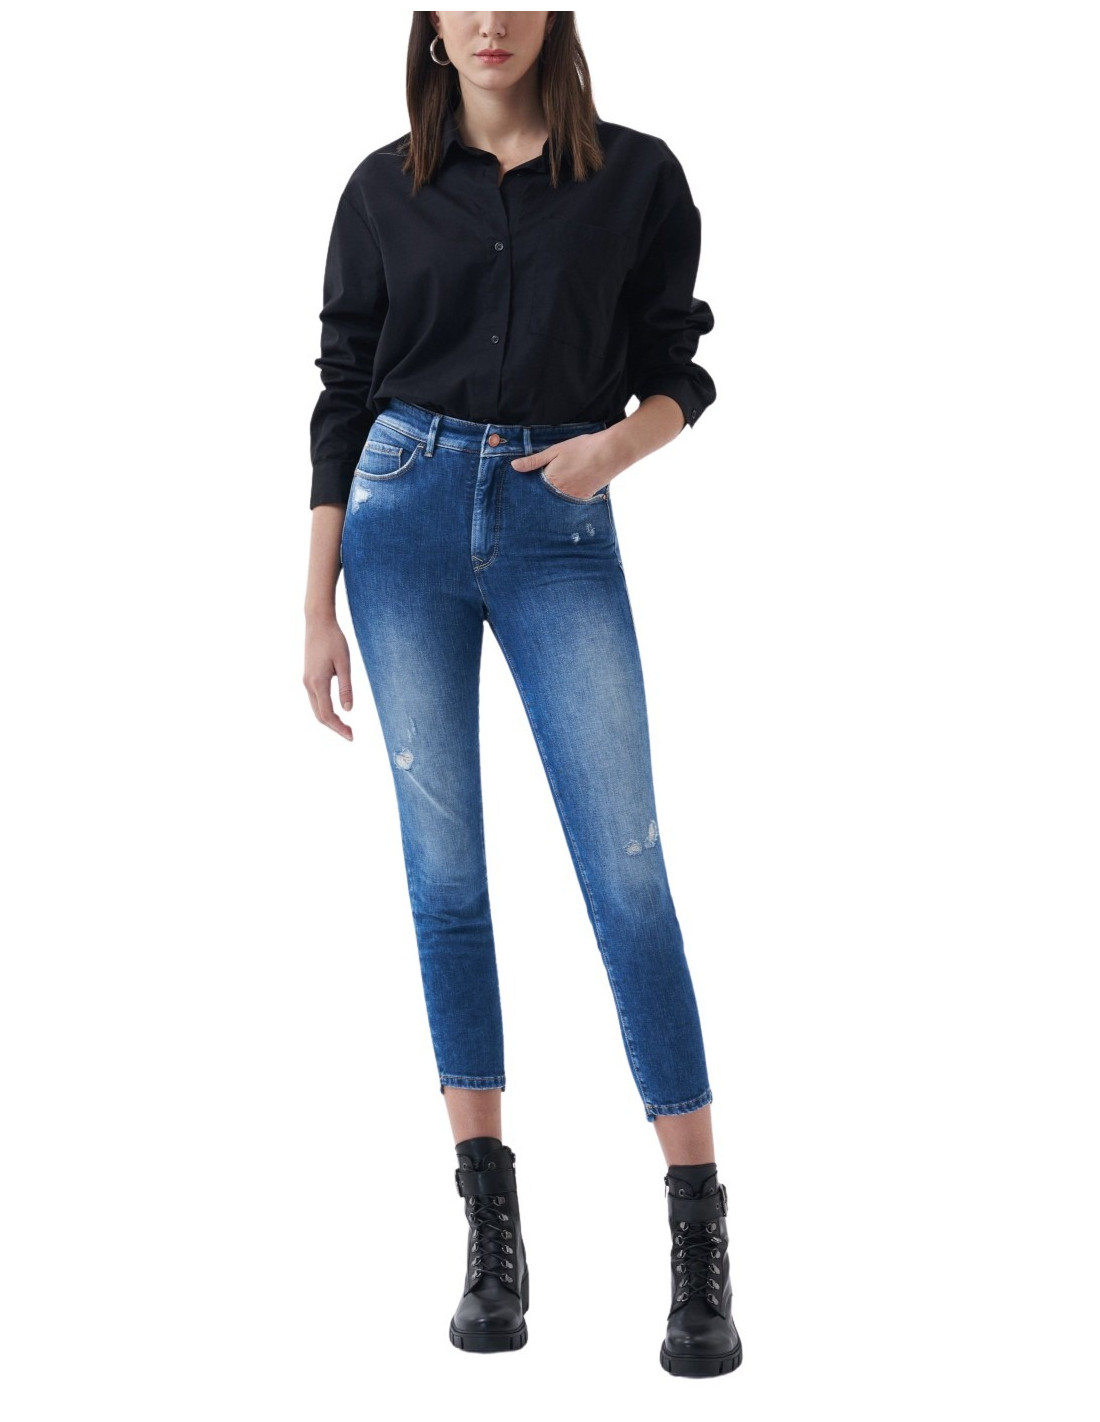 SALSA JEANS skinny push secret glamour cropped azul intenso para Mujer